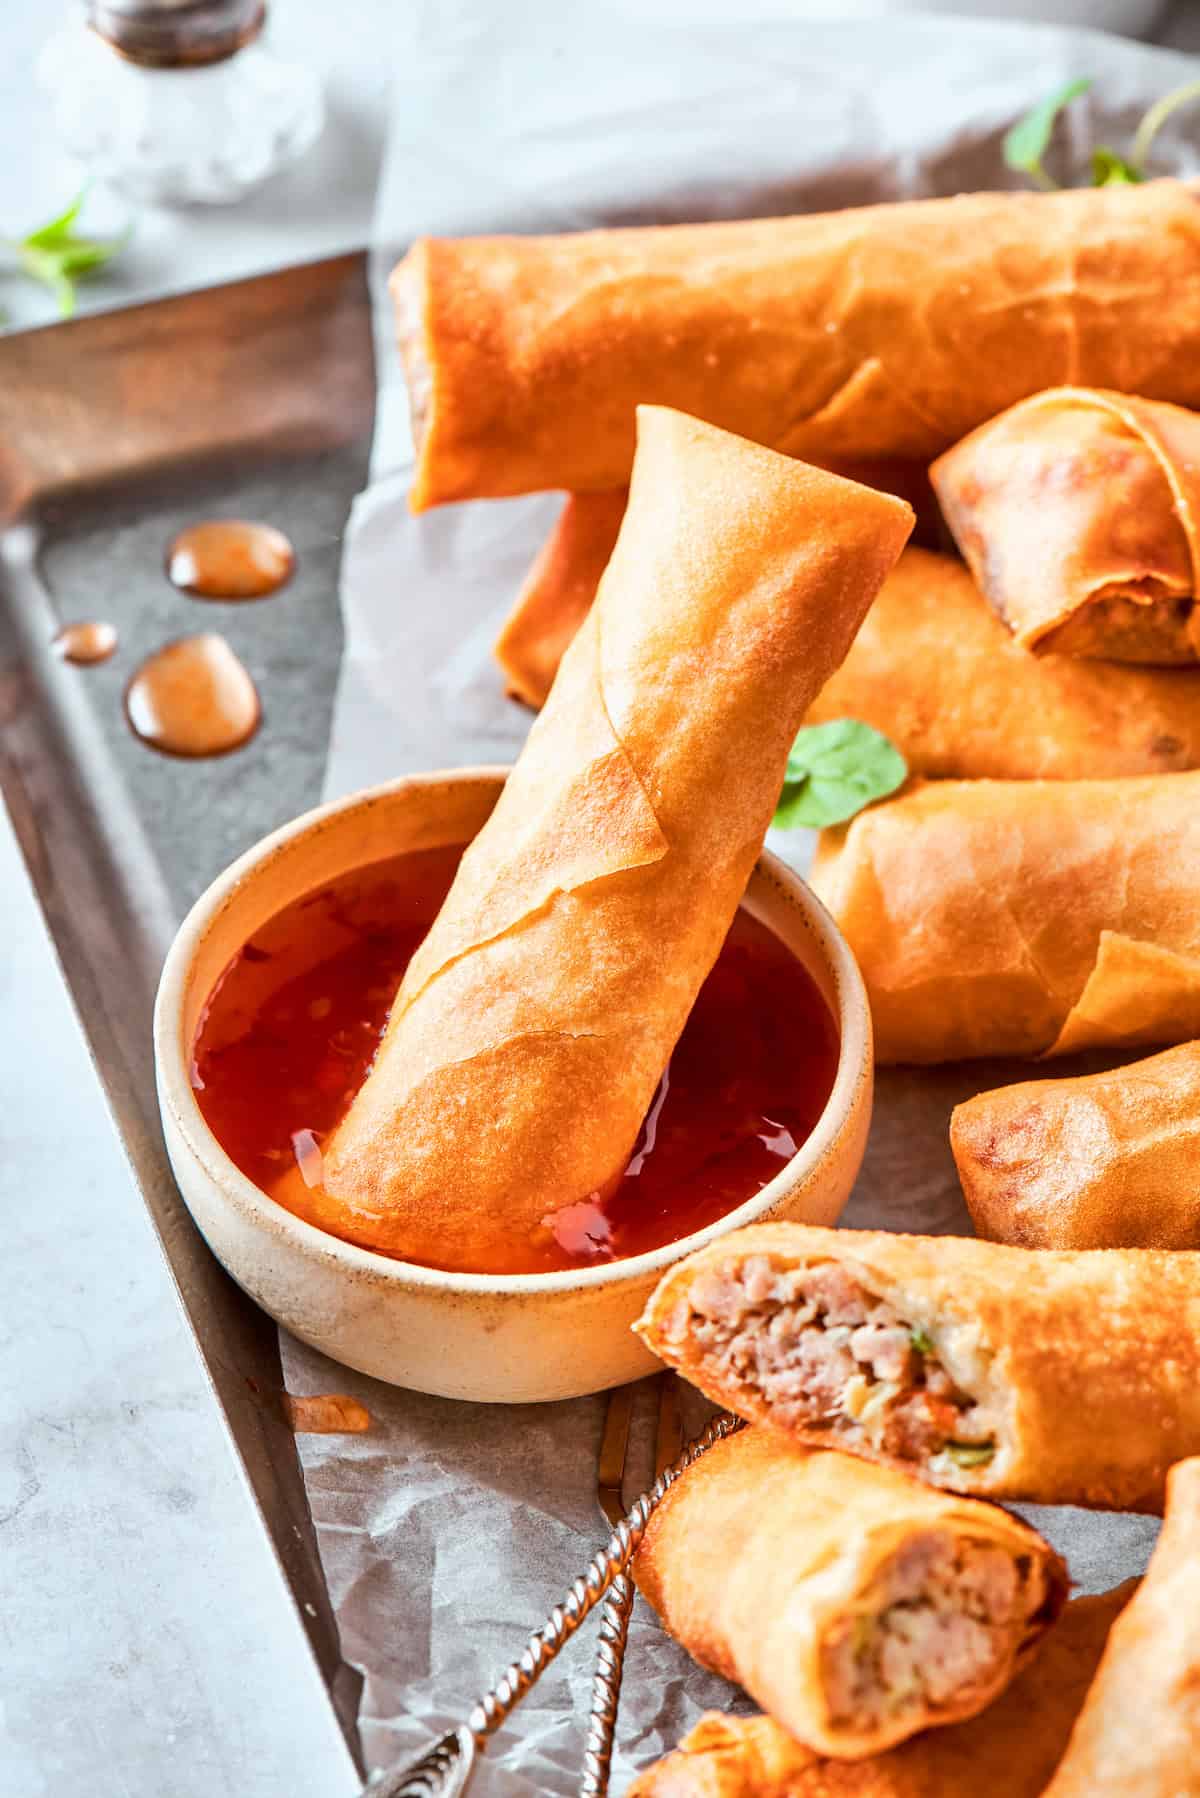 Sliced chicken egg rolls and whole egg rolls are served with a bowl of sauce, with one egg roll dipped in it.